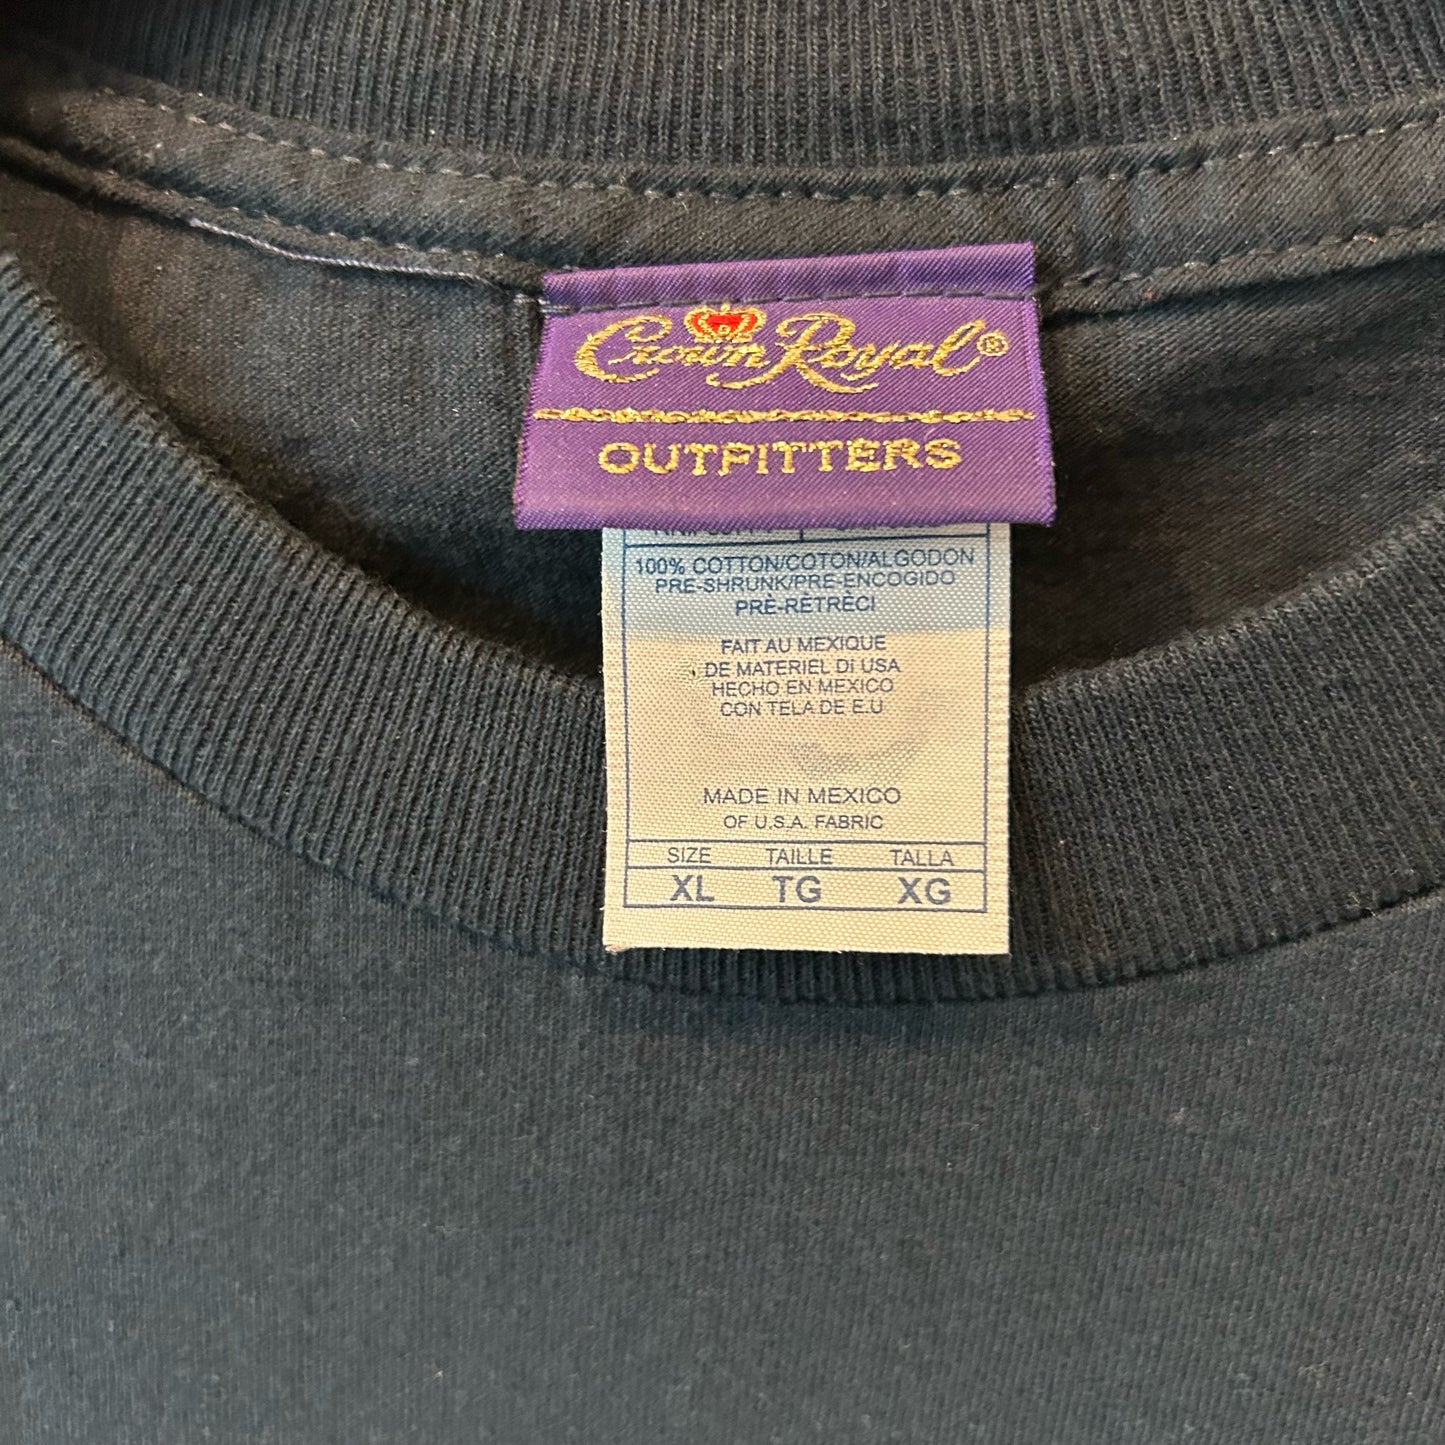 XL Navy Crown Royal Graphic Tee